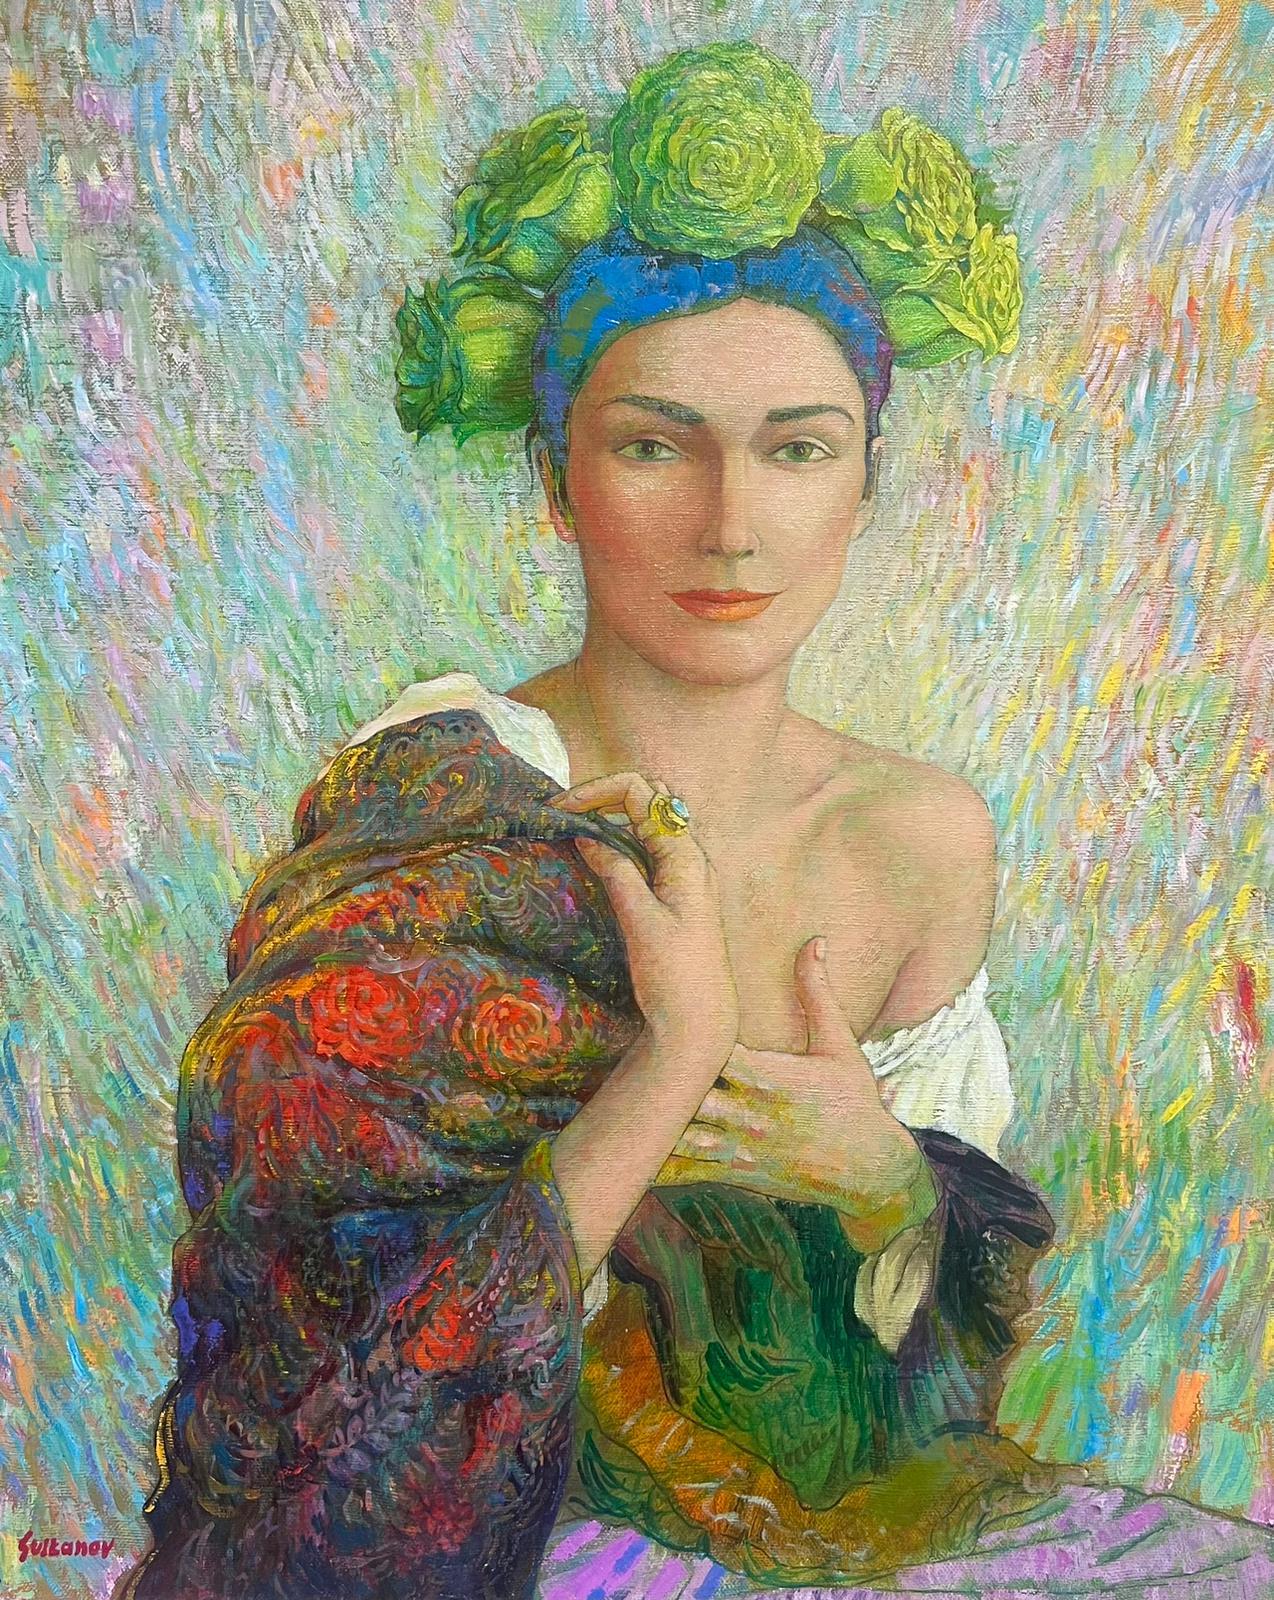 Russian contemporary Figurative Painting - Fine Russian Symbolist Signed Oil Painting Portrait of Young Lady with Headpiece